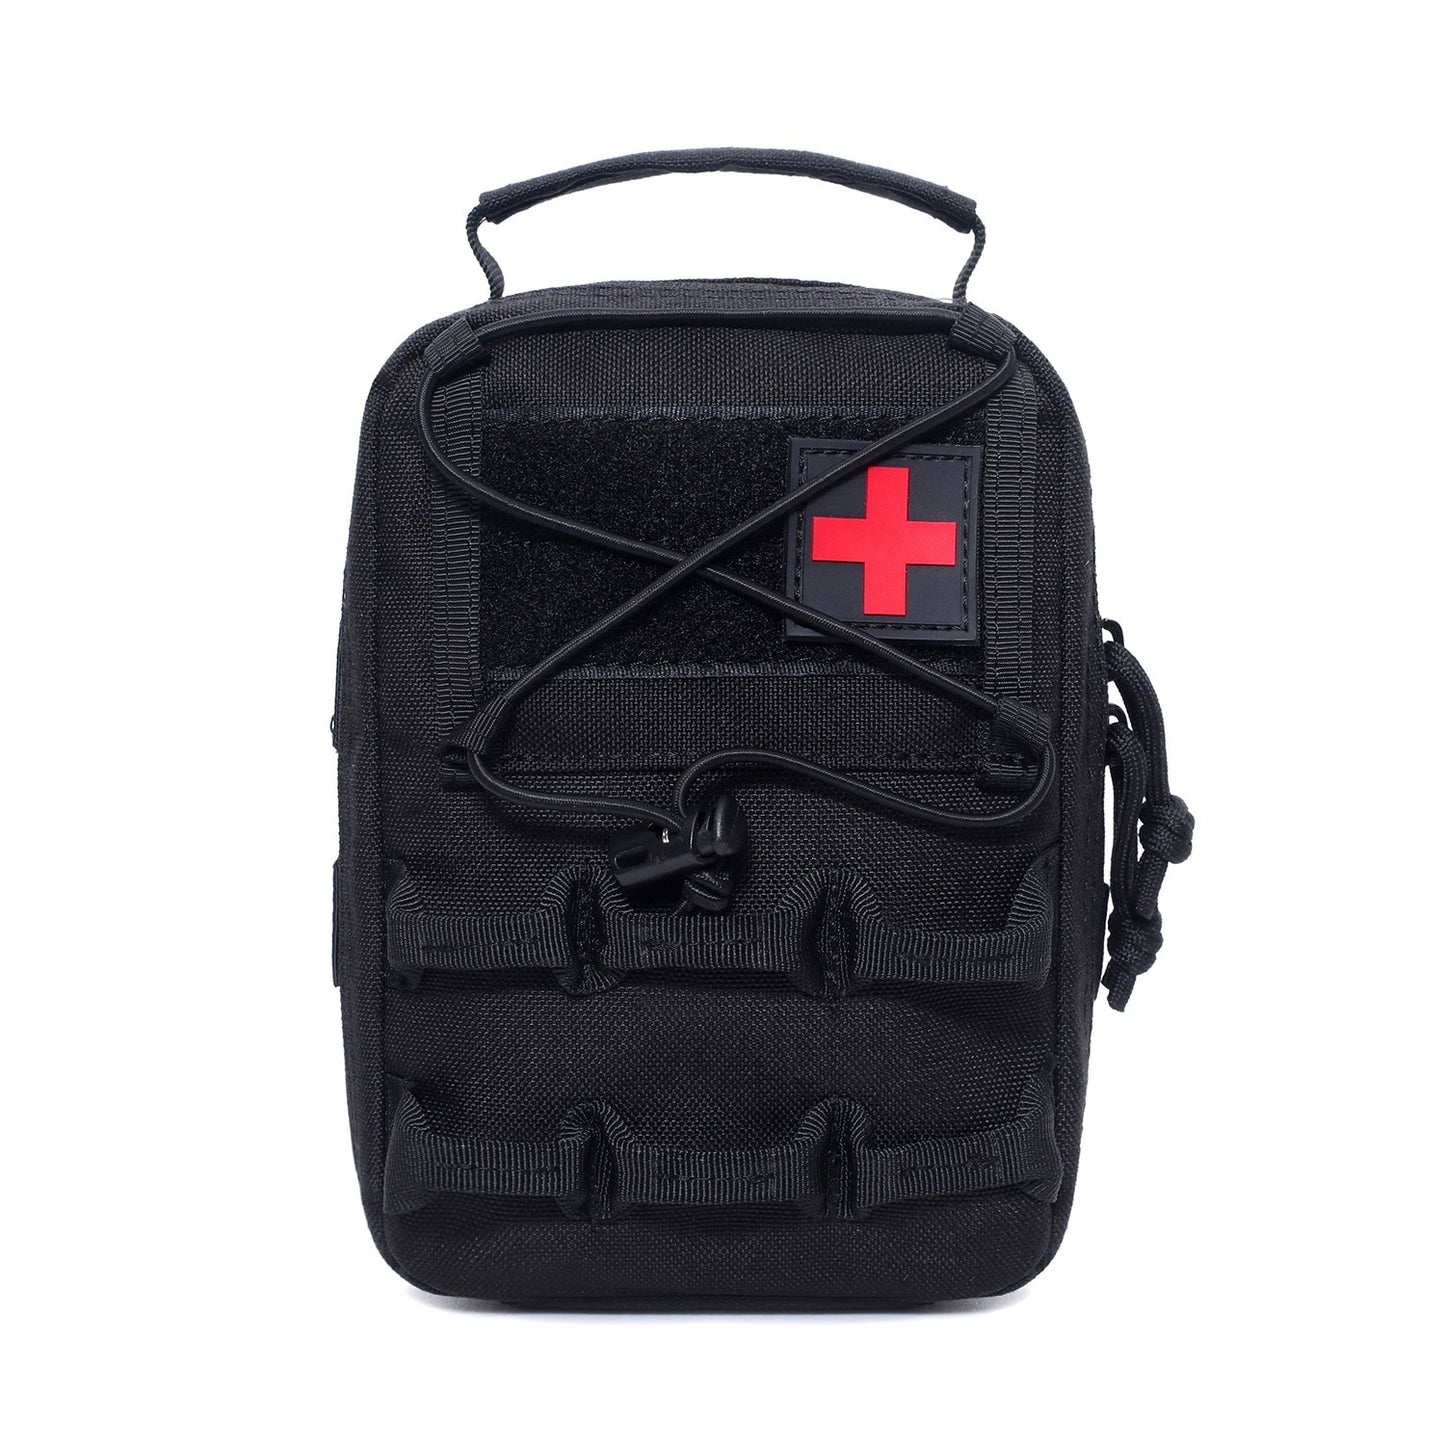 Combat Rescue Emergency Tactical First Aid Medical Bag